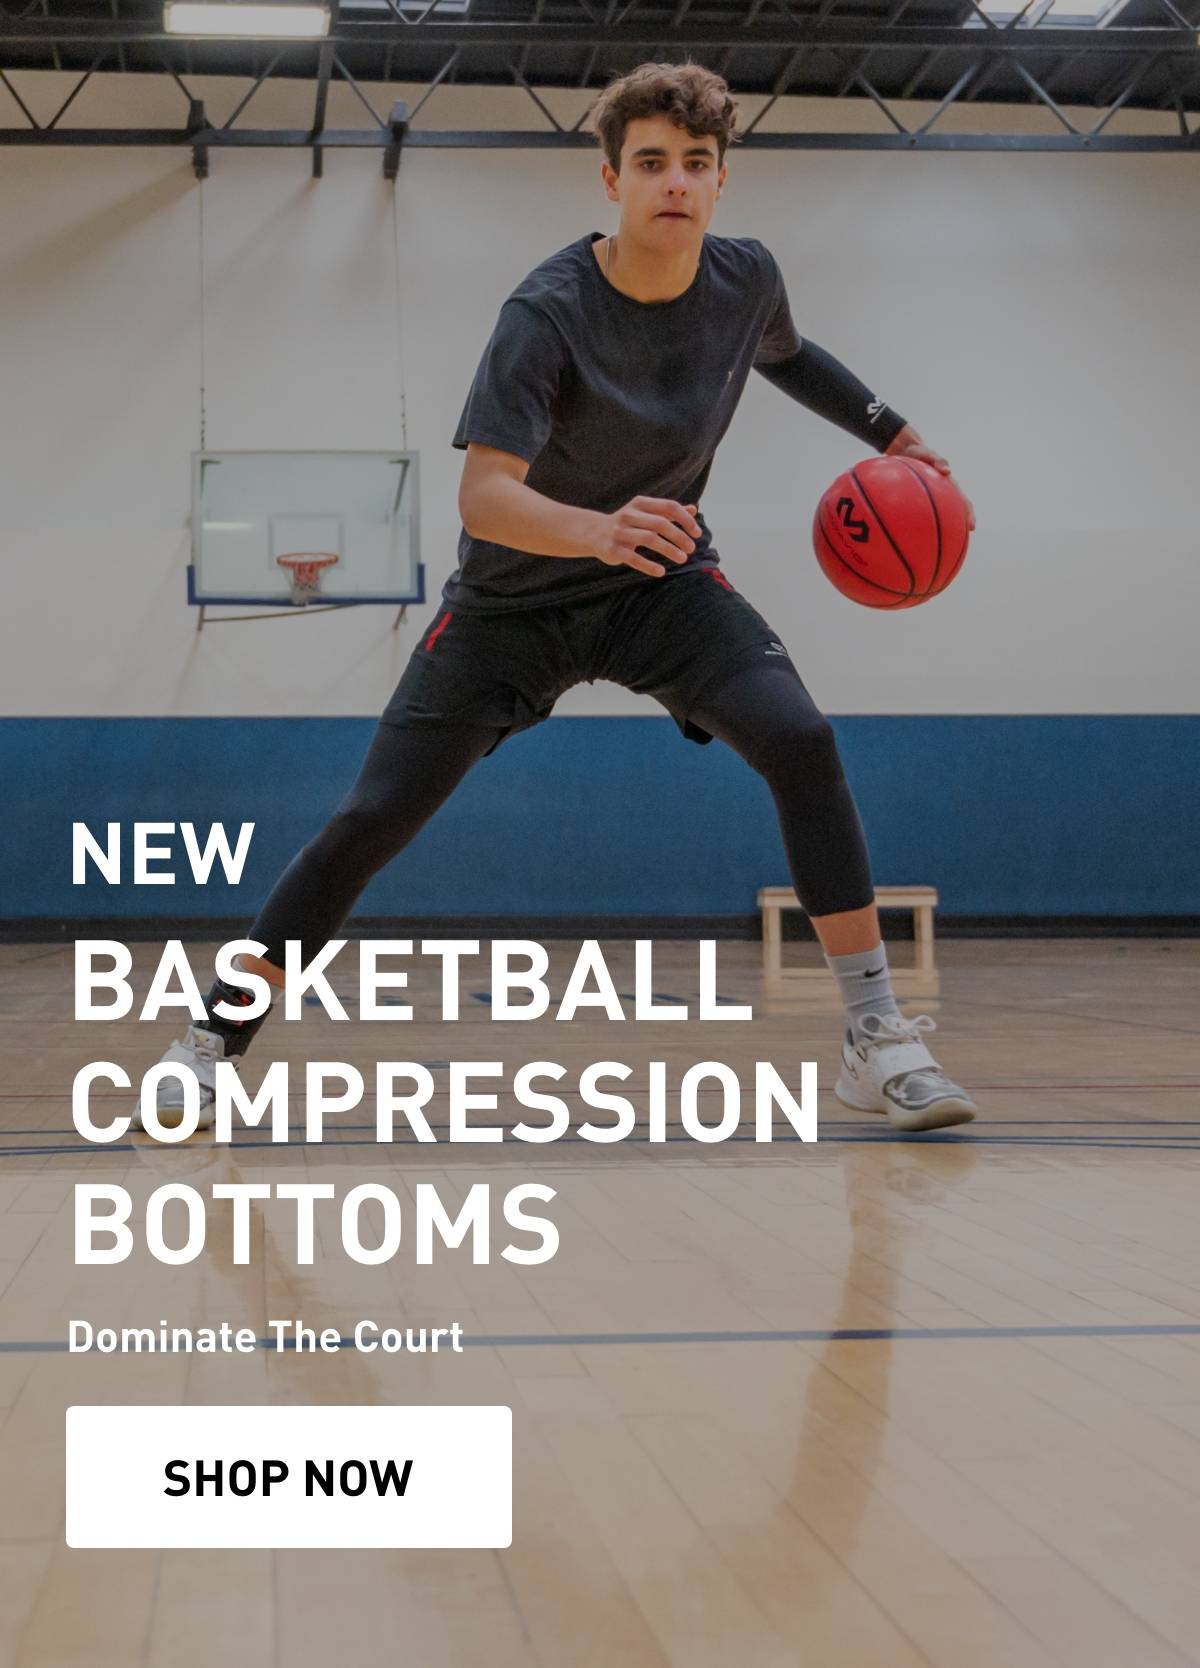 NEW Basketball Compression Bottoms Dominate the Court SHOP NOW